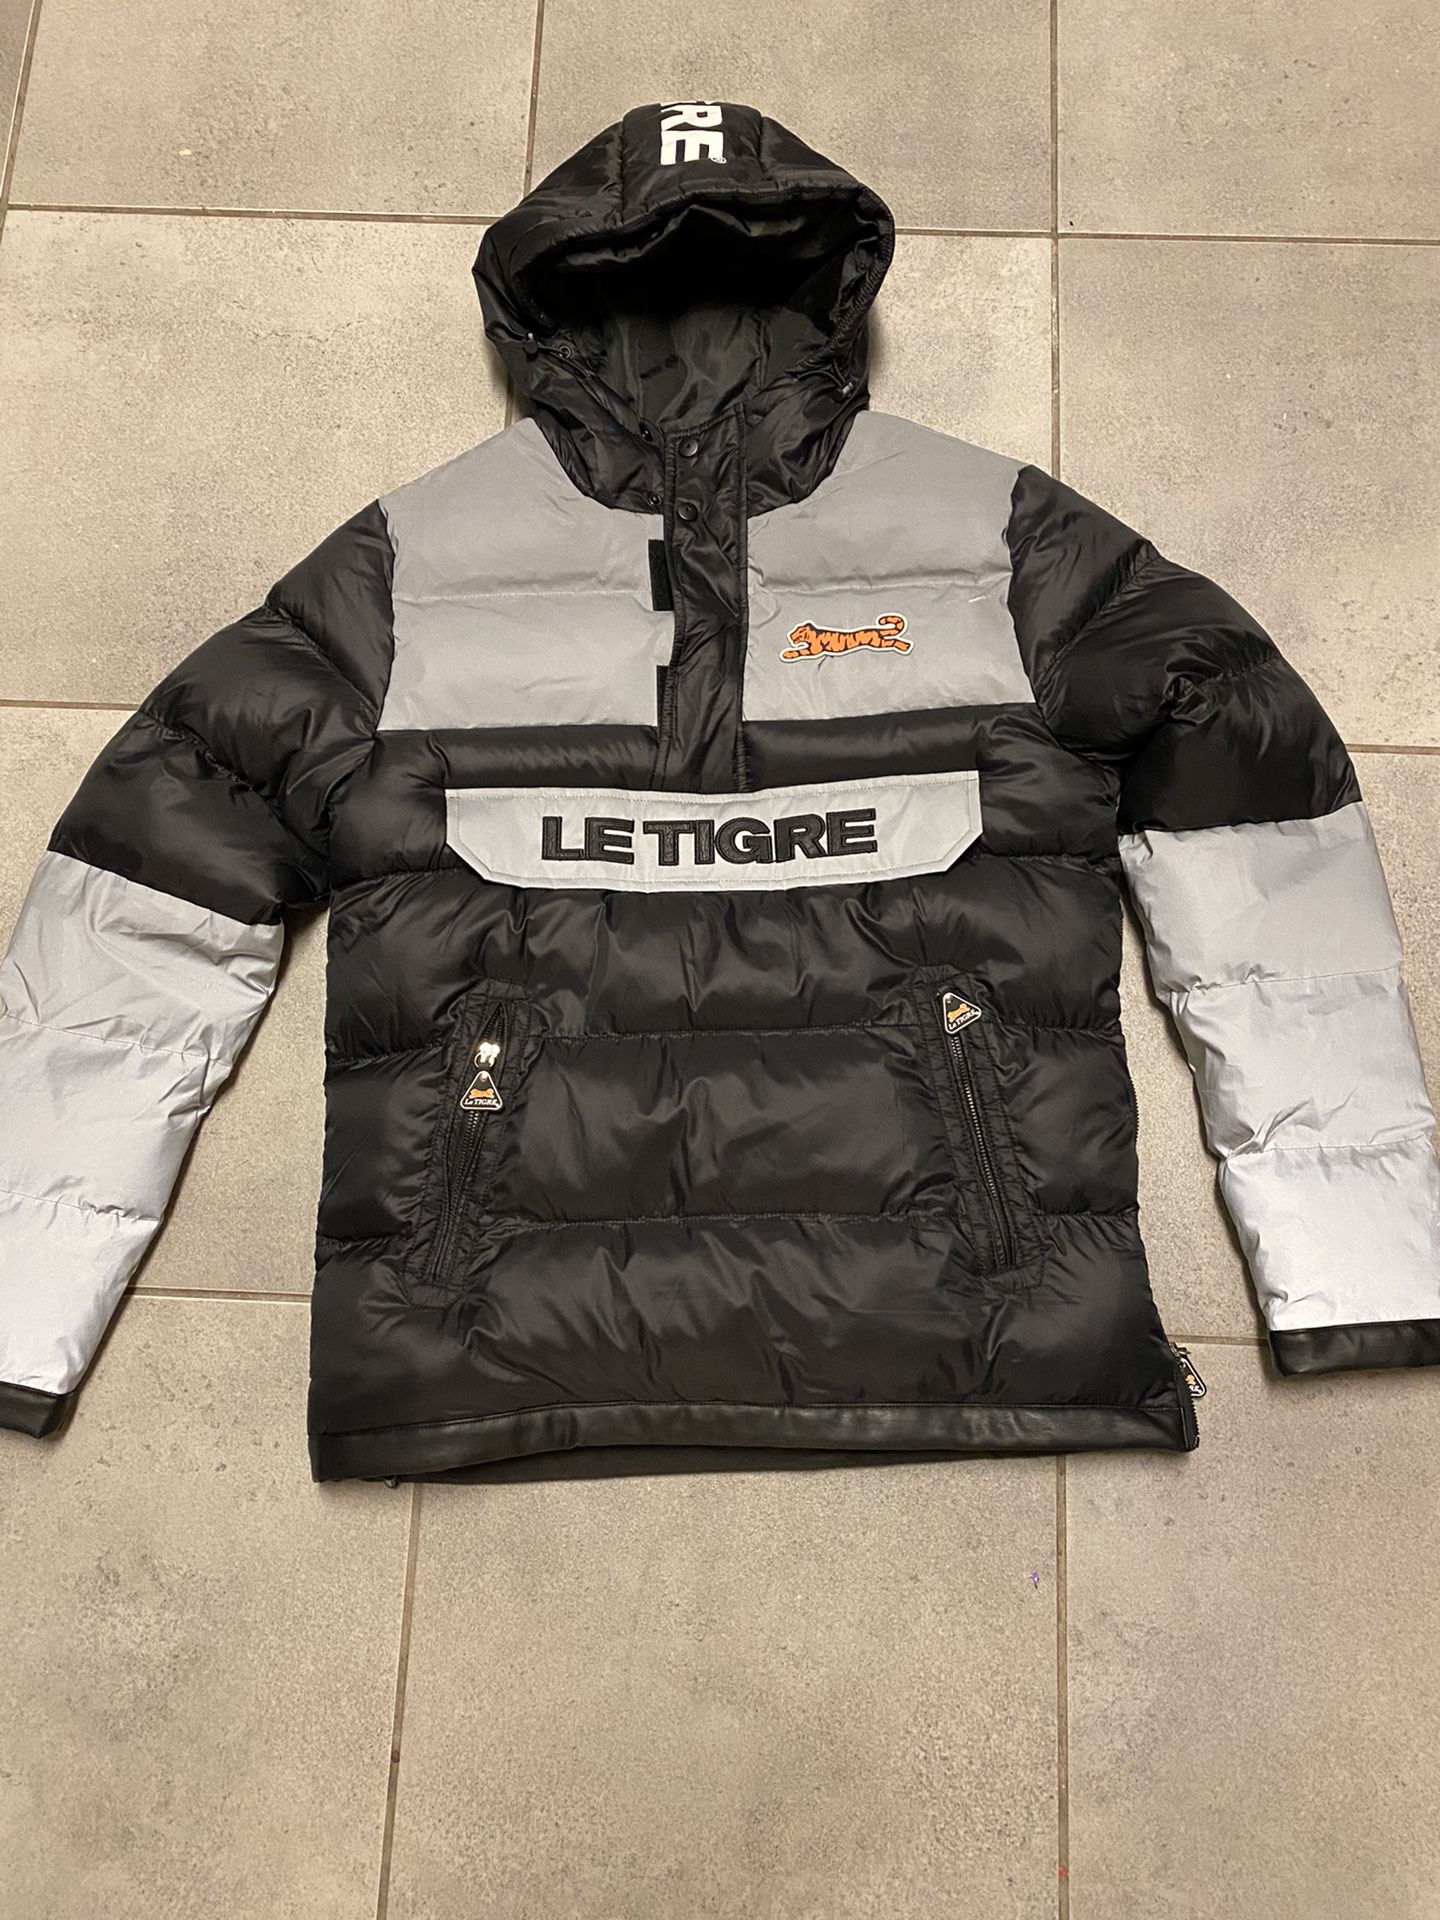 Le tigre Puffer pull over hoodie , jacket size Medium